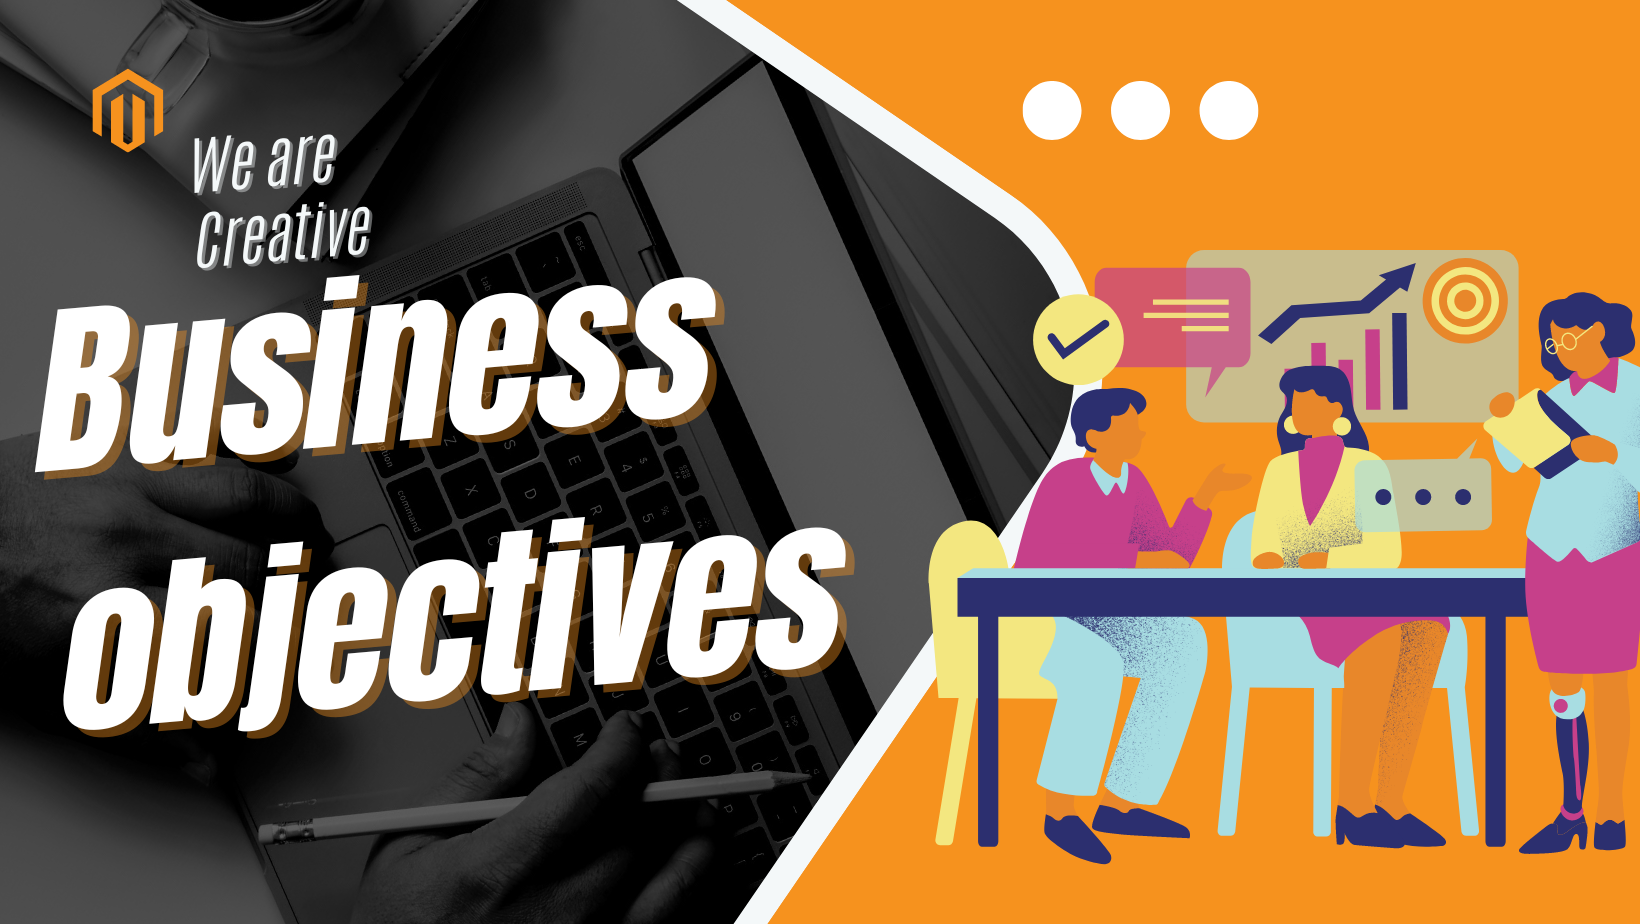 Business objectives